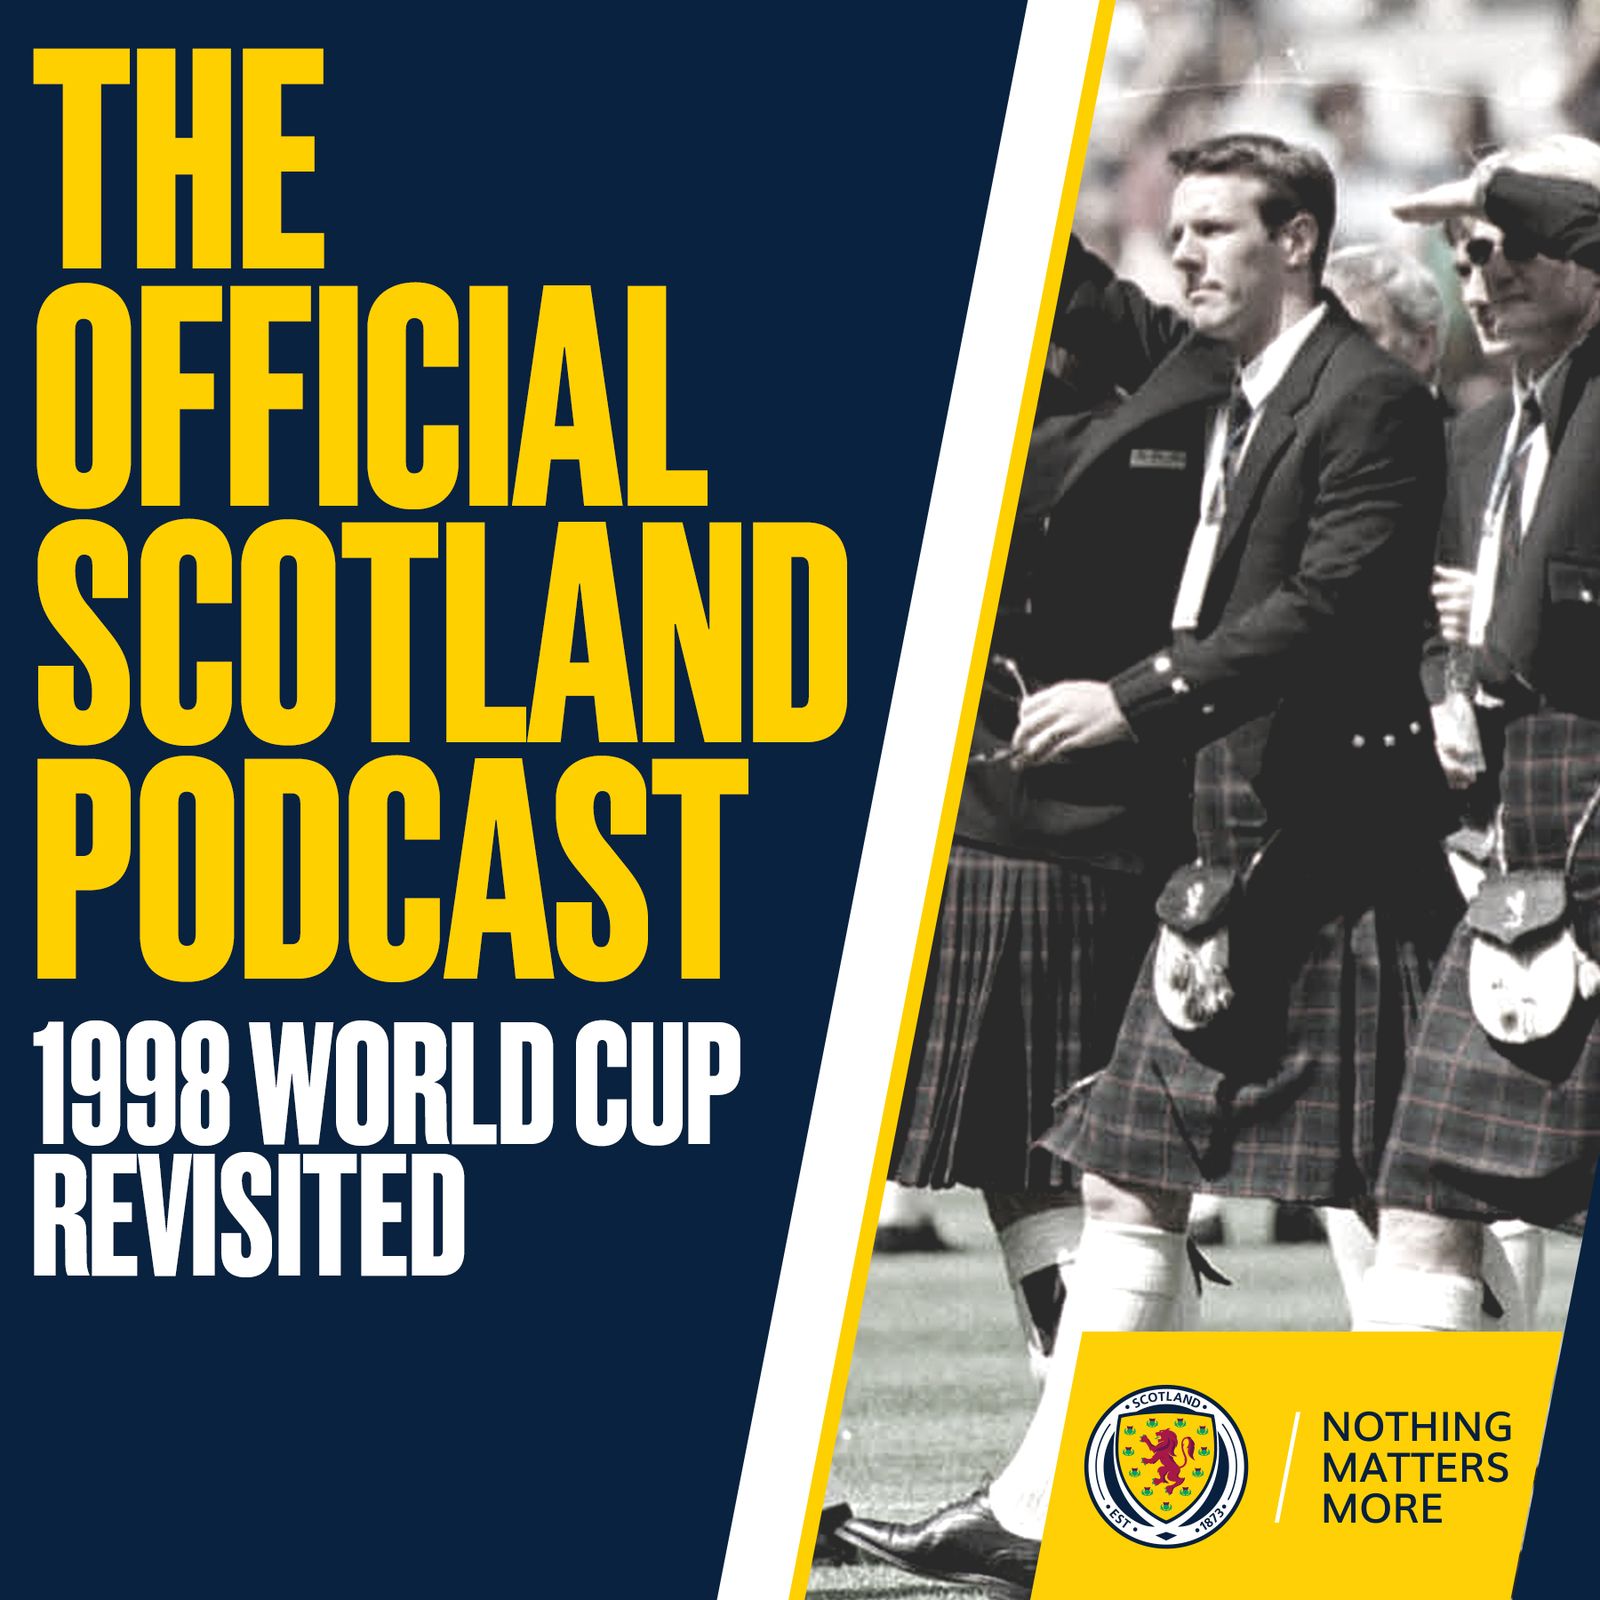 1998 World Cup Revisited – The Official Scotland Podcast